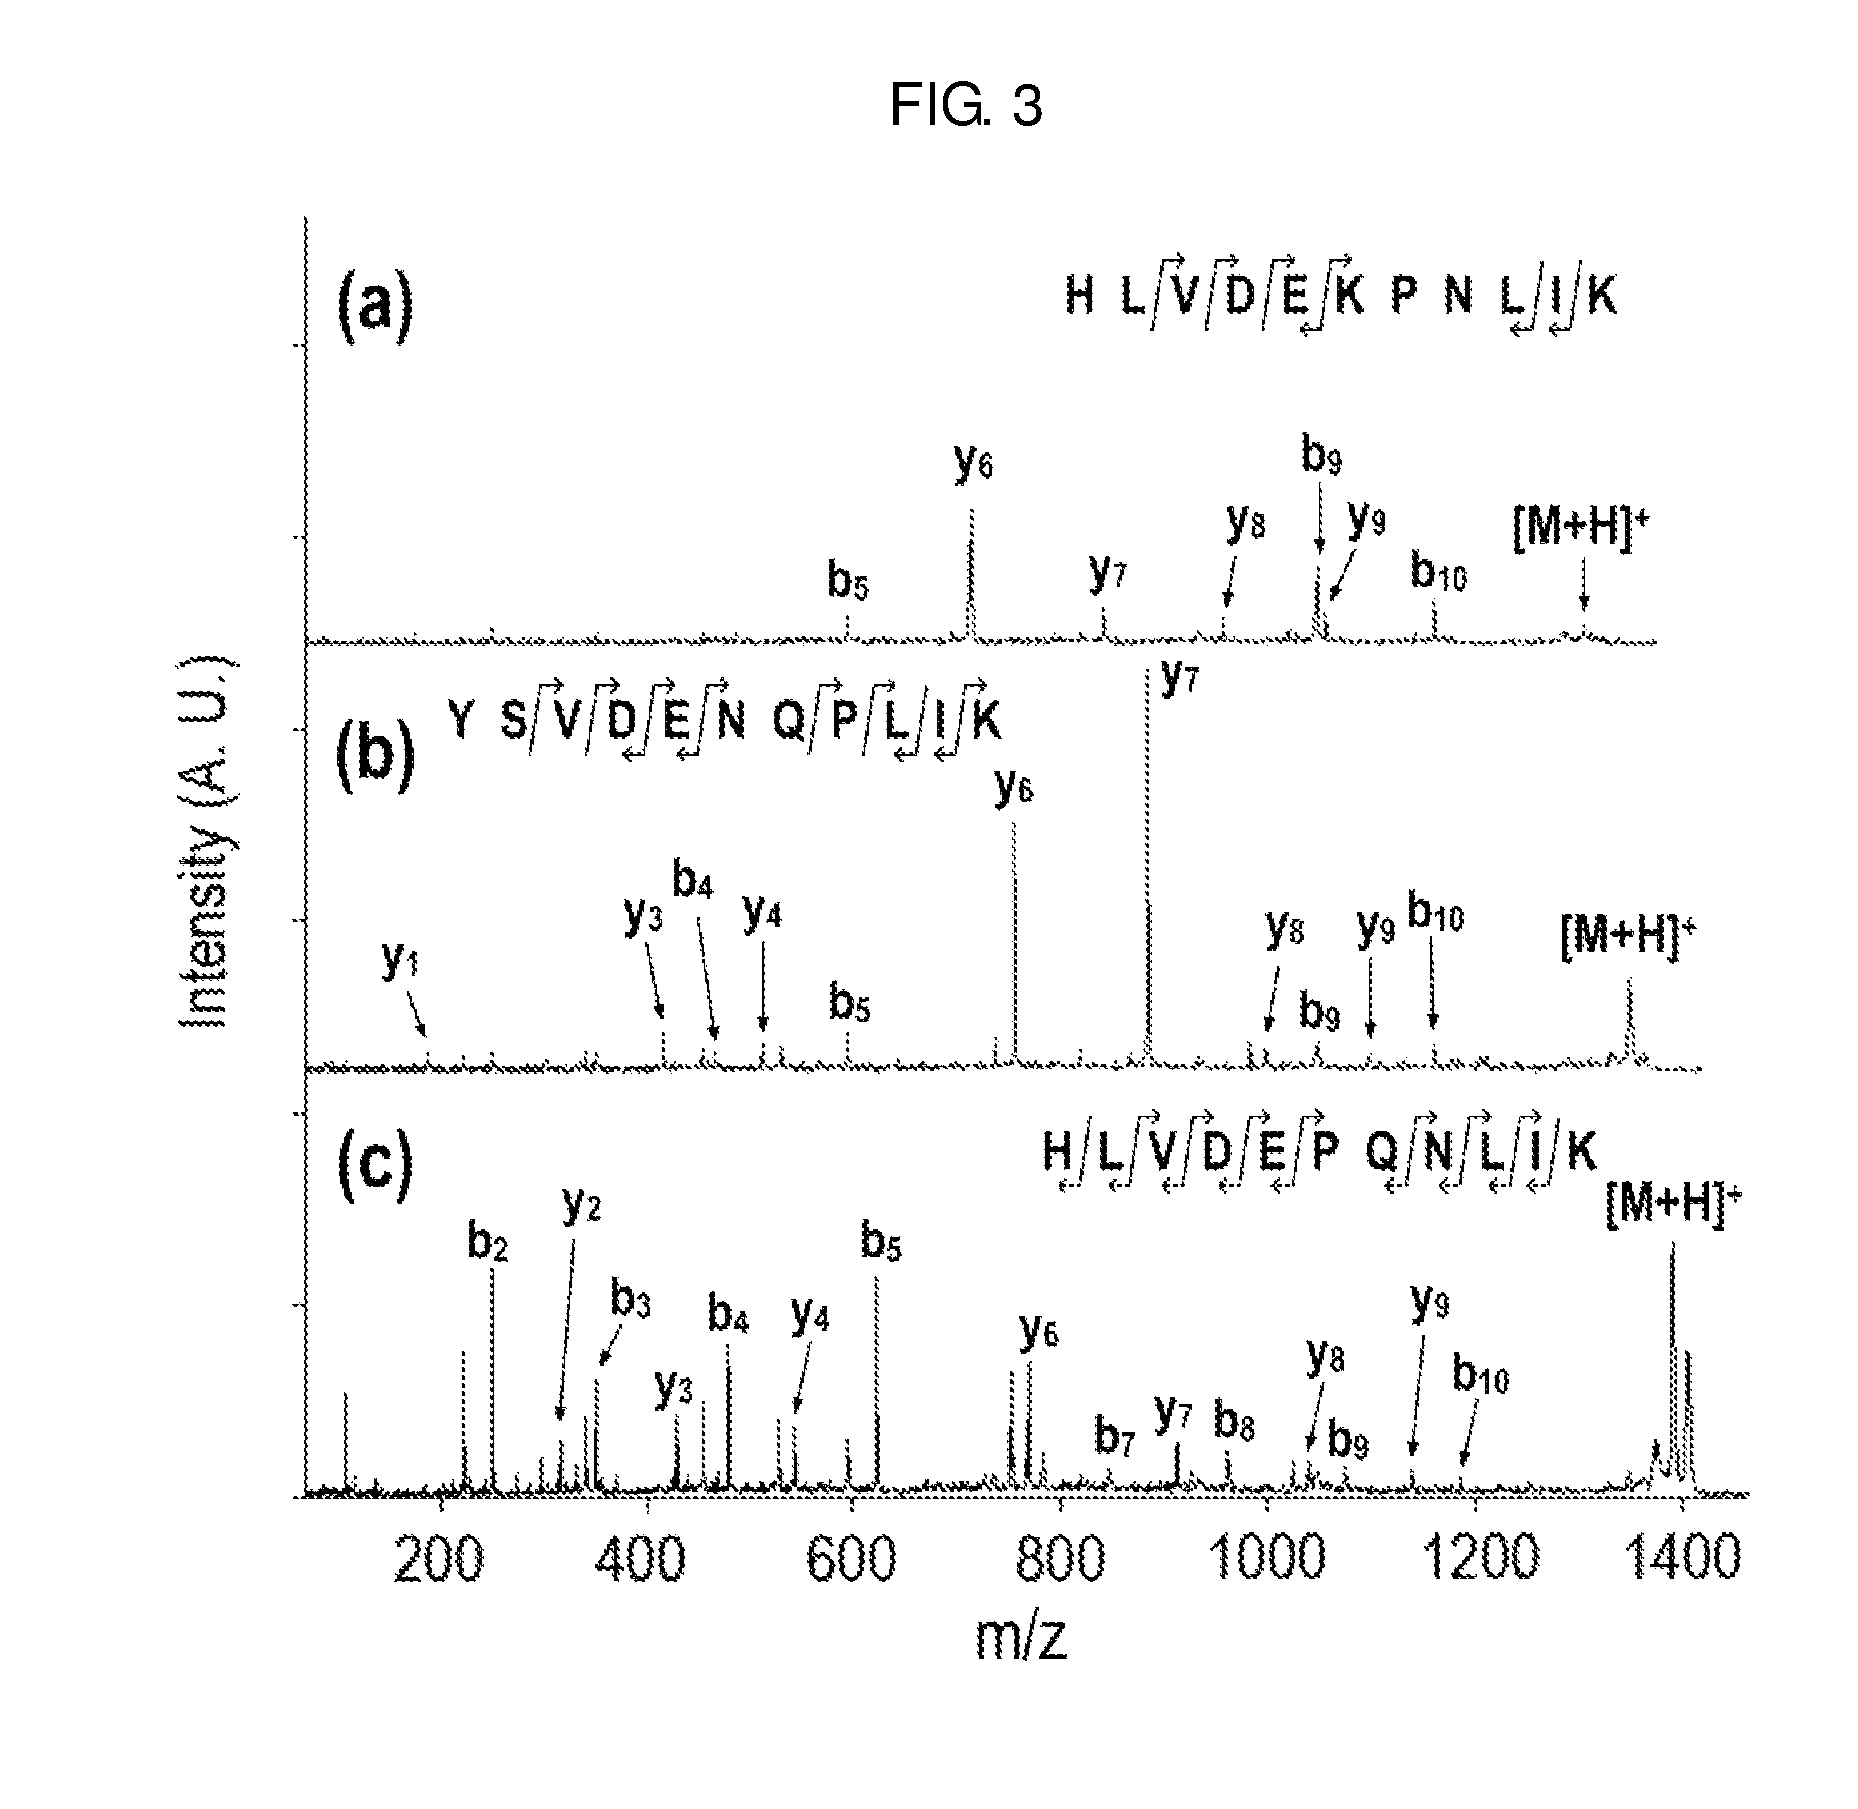 Method of de novo sequencing of peptide using the MALDI mass spectrometry, method and apparatus for preparing sample for MALDI mass spectrometry